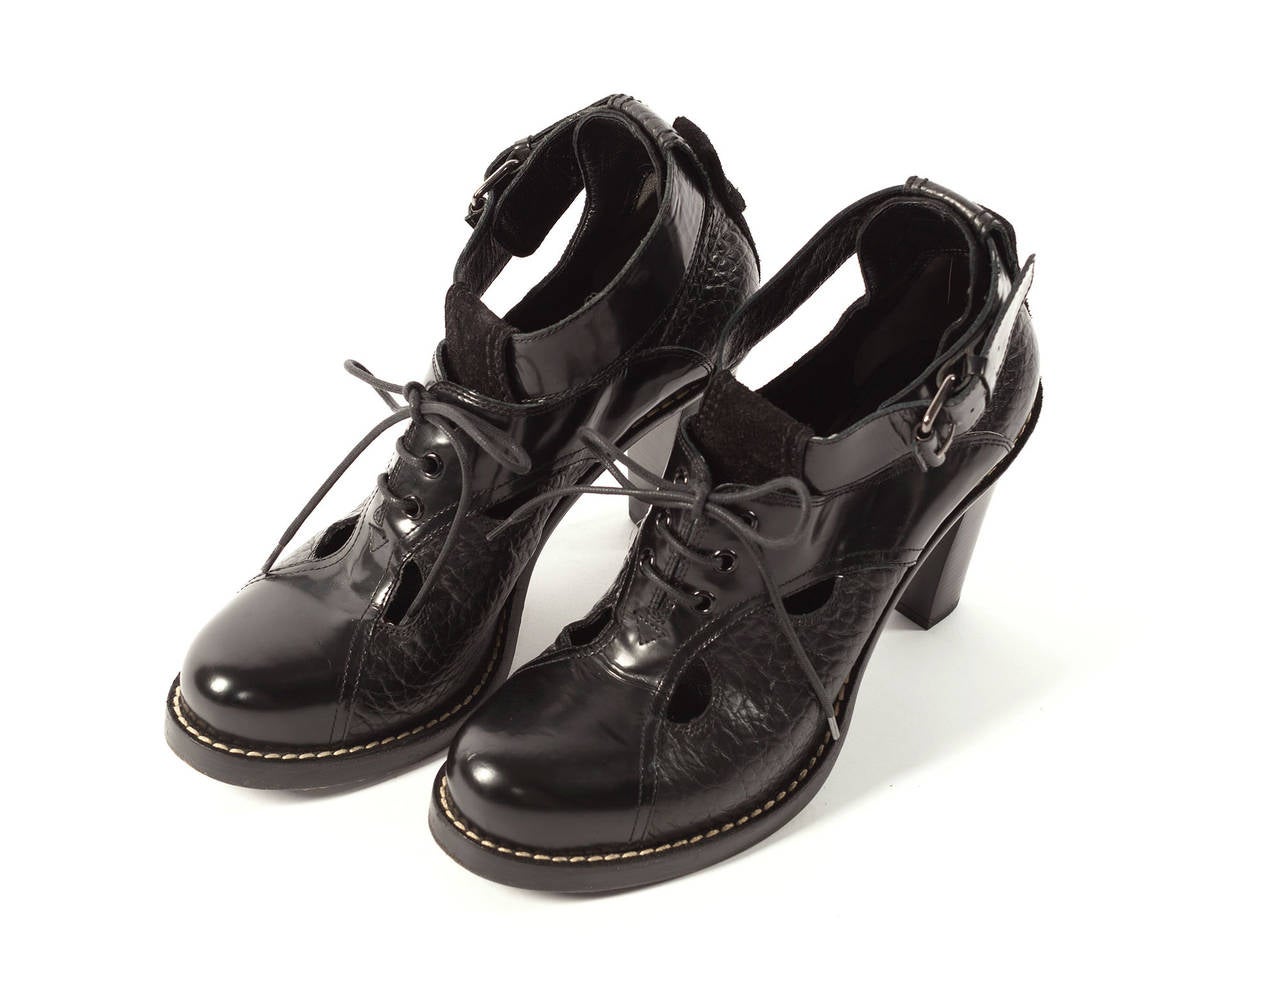 Black Balenciaga By Nicolas Ghesquire Ankle boots with multi straps and closures